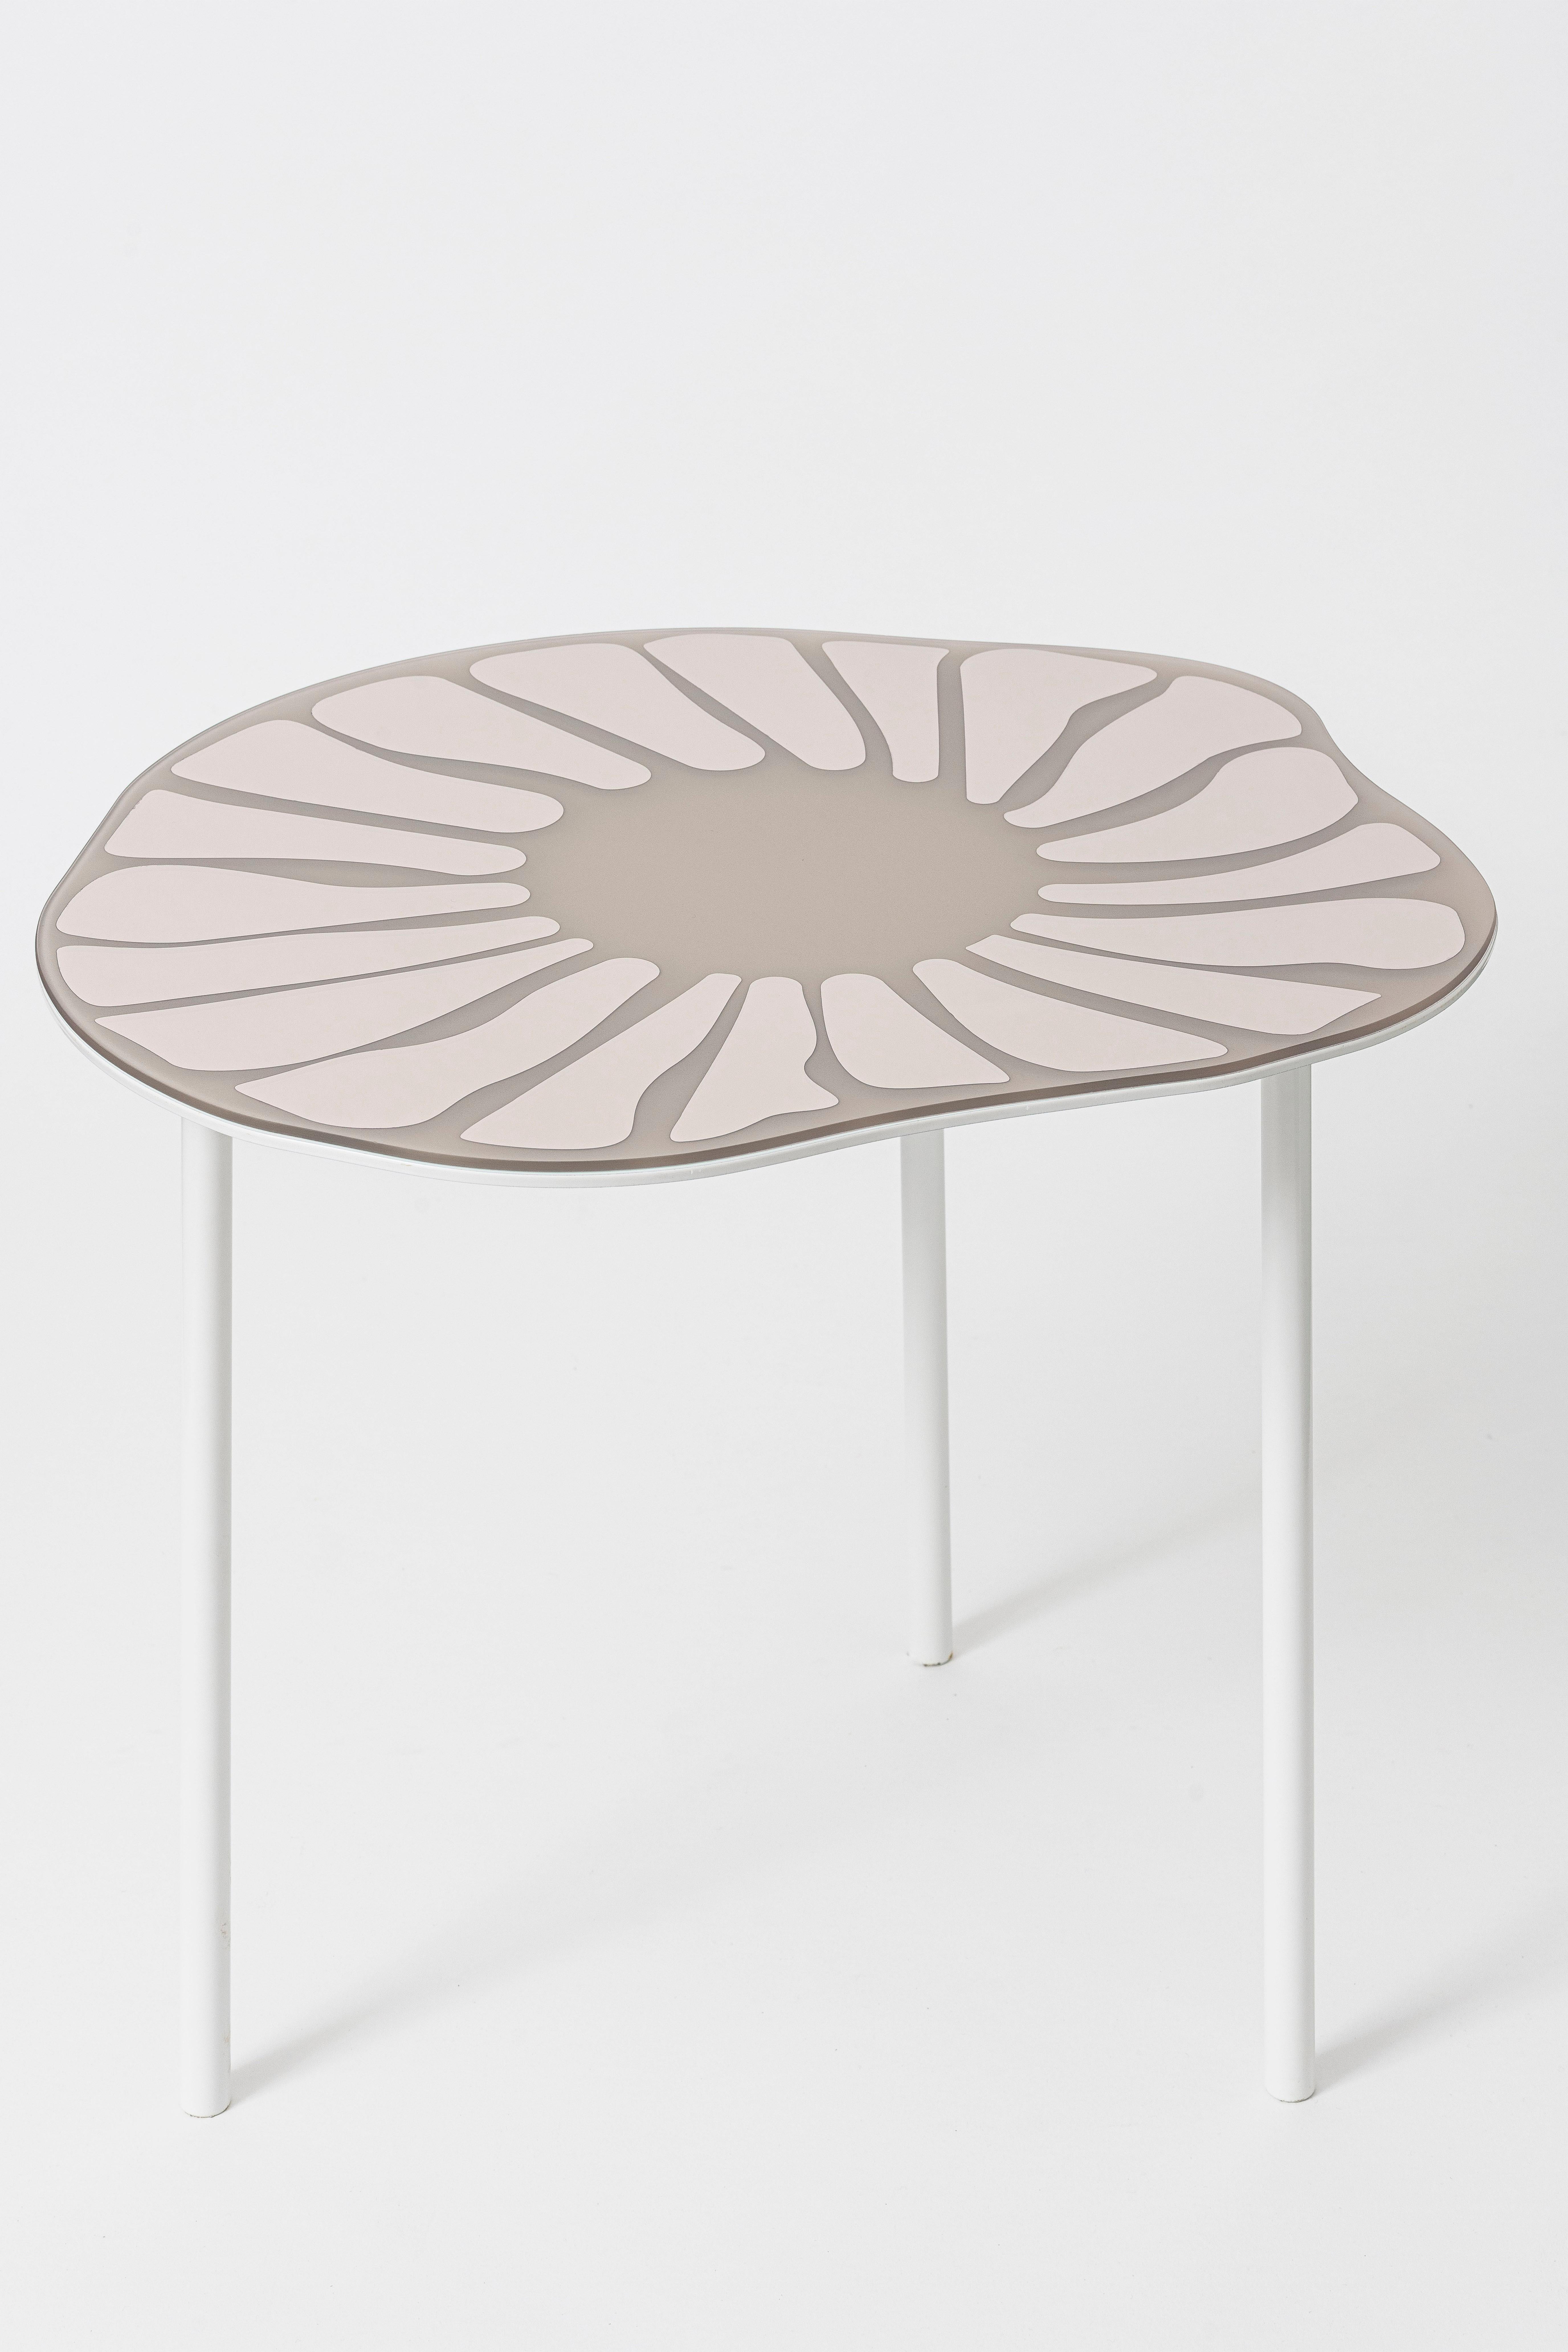 Cesareo is a coffee table made of carefully selected mirrored surfaces and lacquered metal with a matte finish.
The product features soft, undulating lines reminiscent of the natural world.
Thus, the shape of the coffee table has an irregular